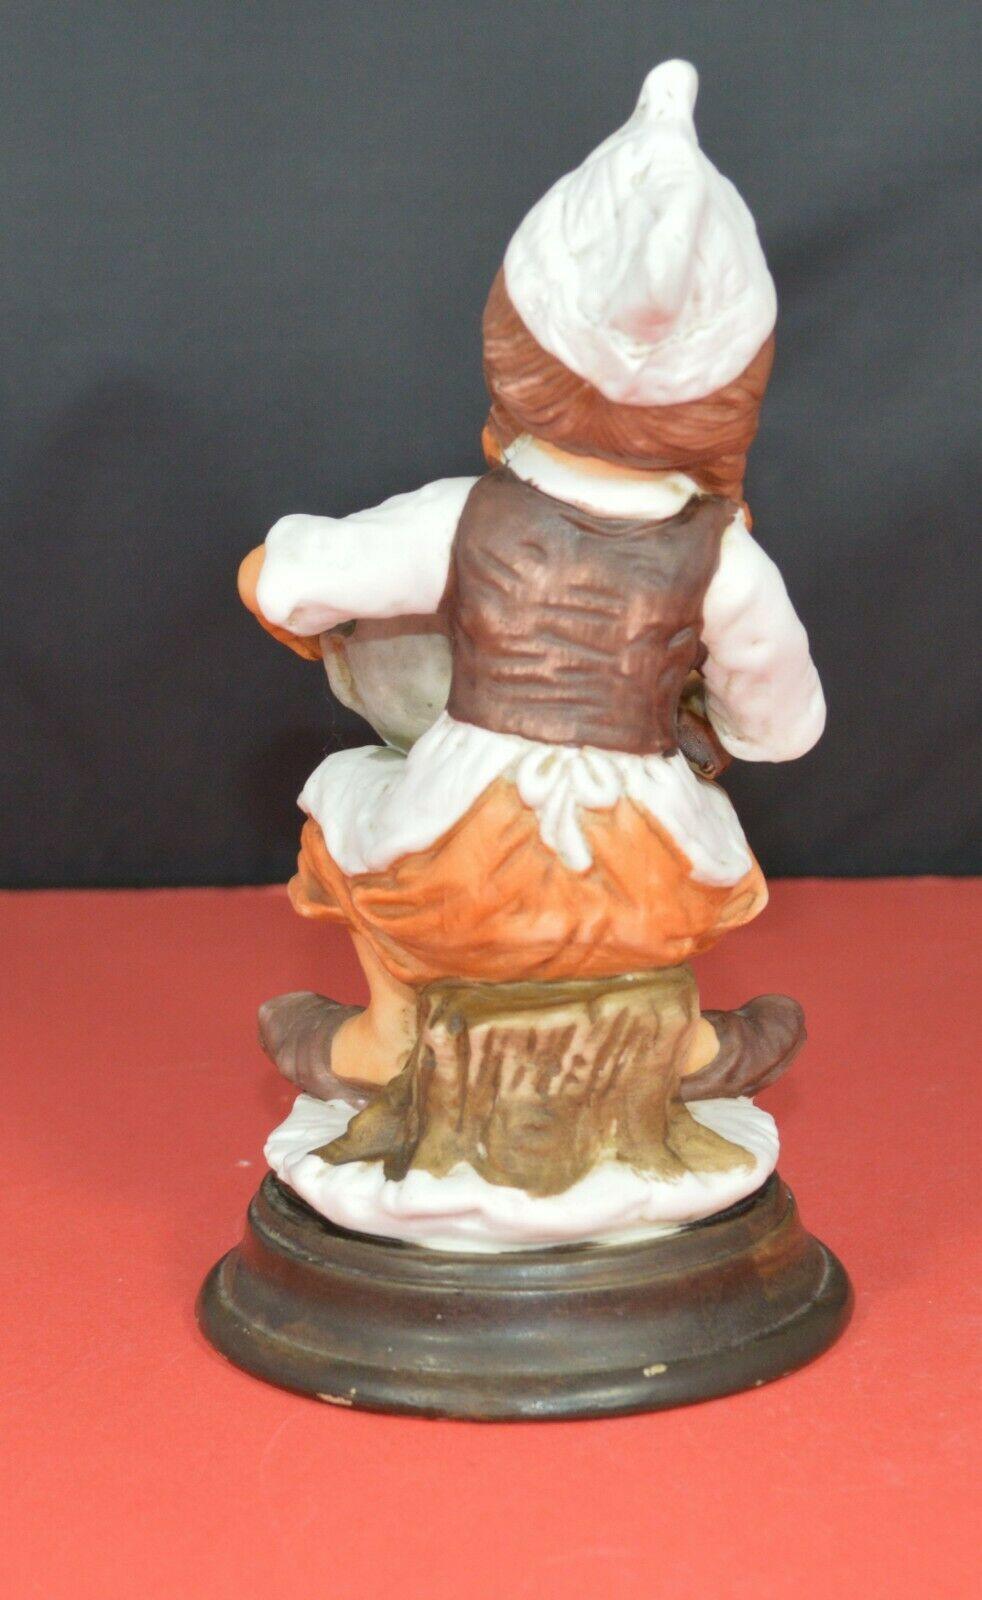 TWO DIFFERENT DECORATIVE FIGURINES OF A YOUNG COOK SITTING ON A TREE STUMP - TMD167207